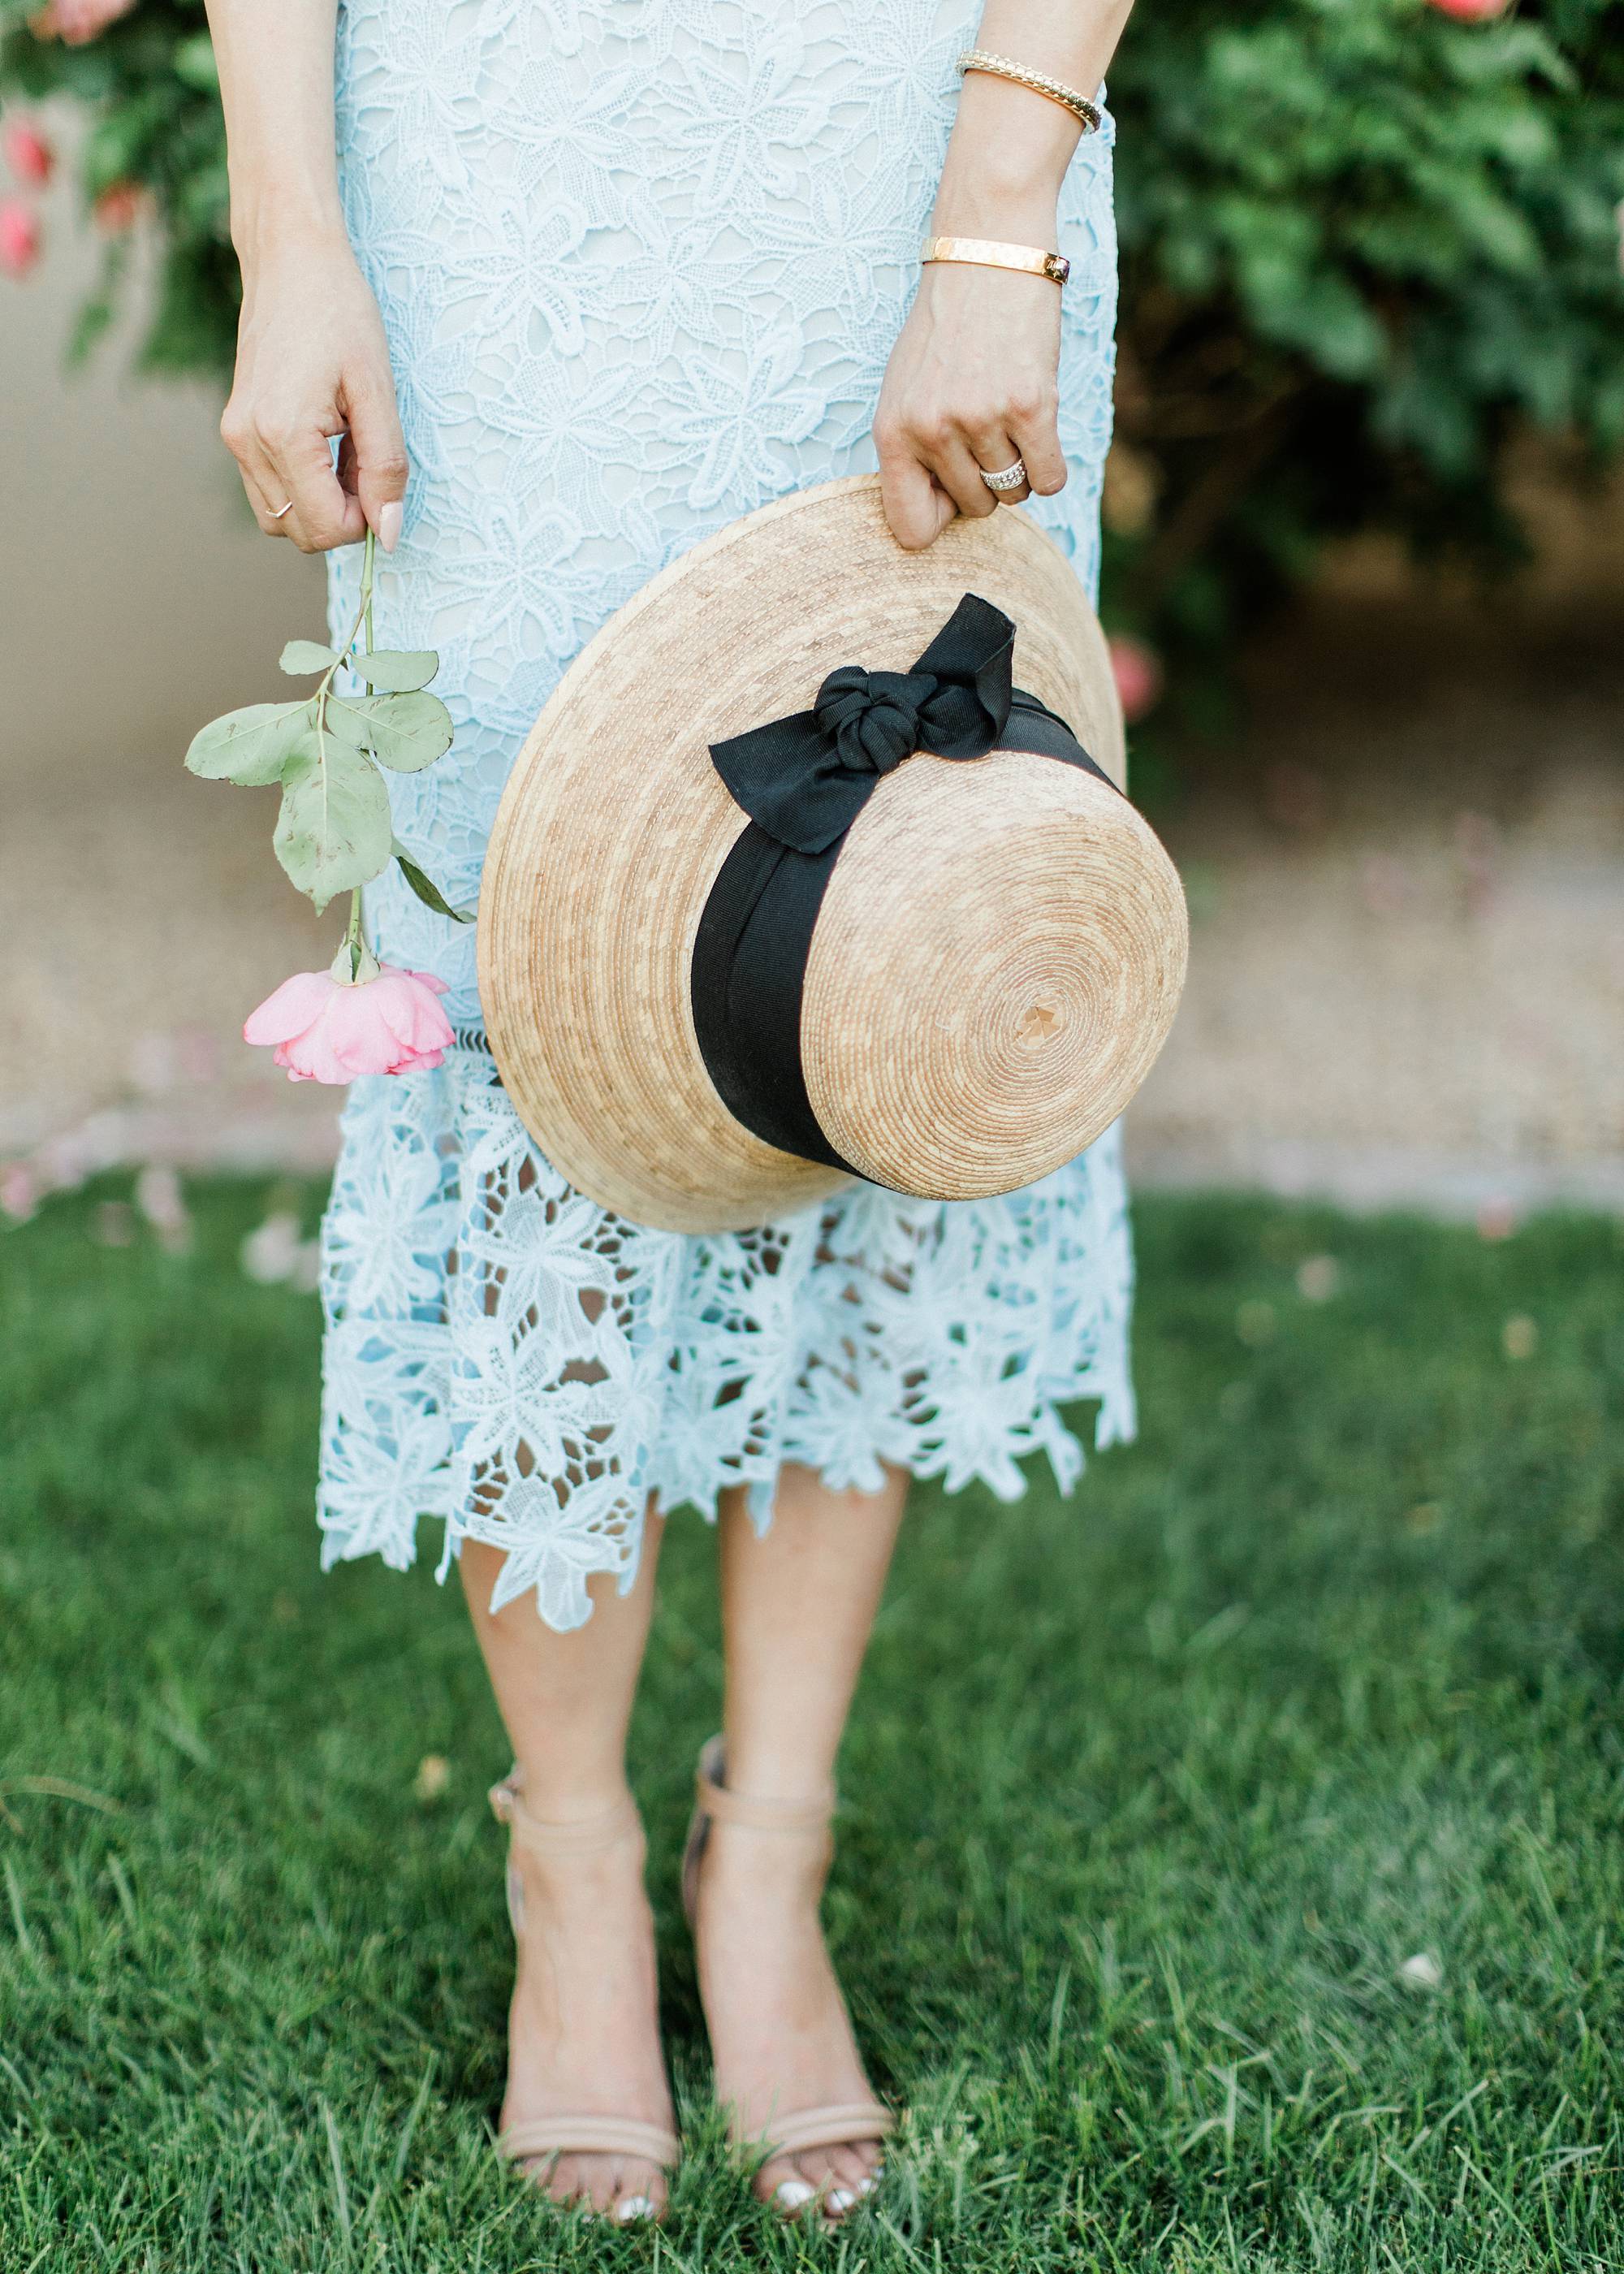 blue lace dress with garden hat from terrain nestled between pink roses against the wall - lifestyle blogger Diana Elizabeth phoenix scottsdale arizona